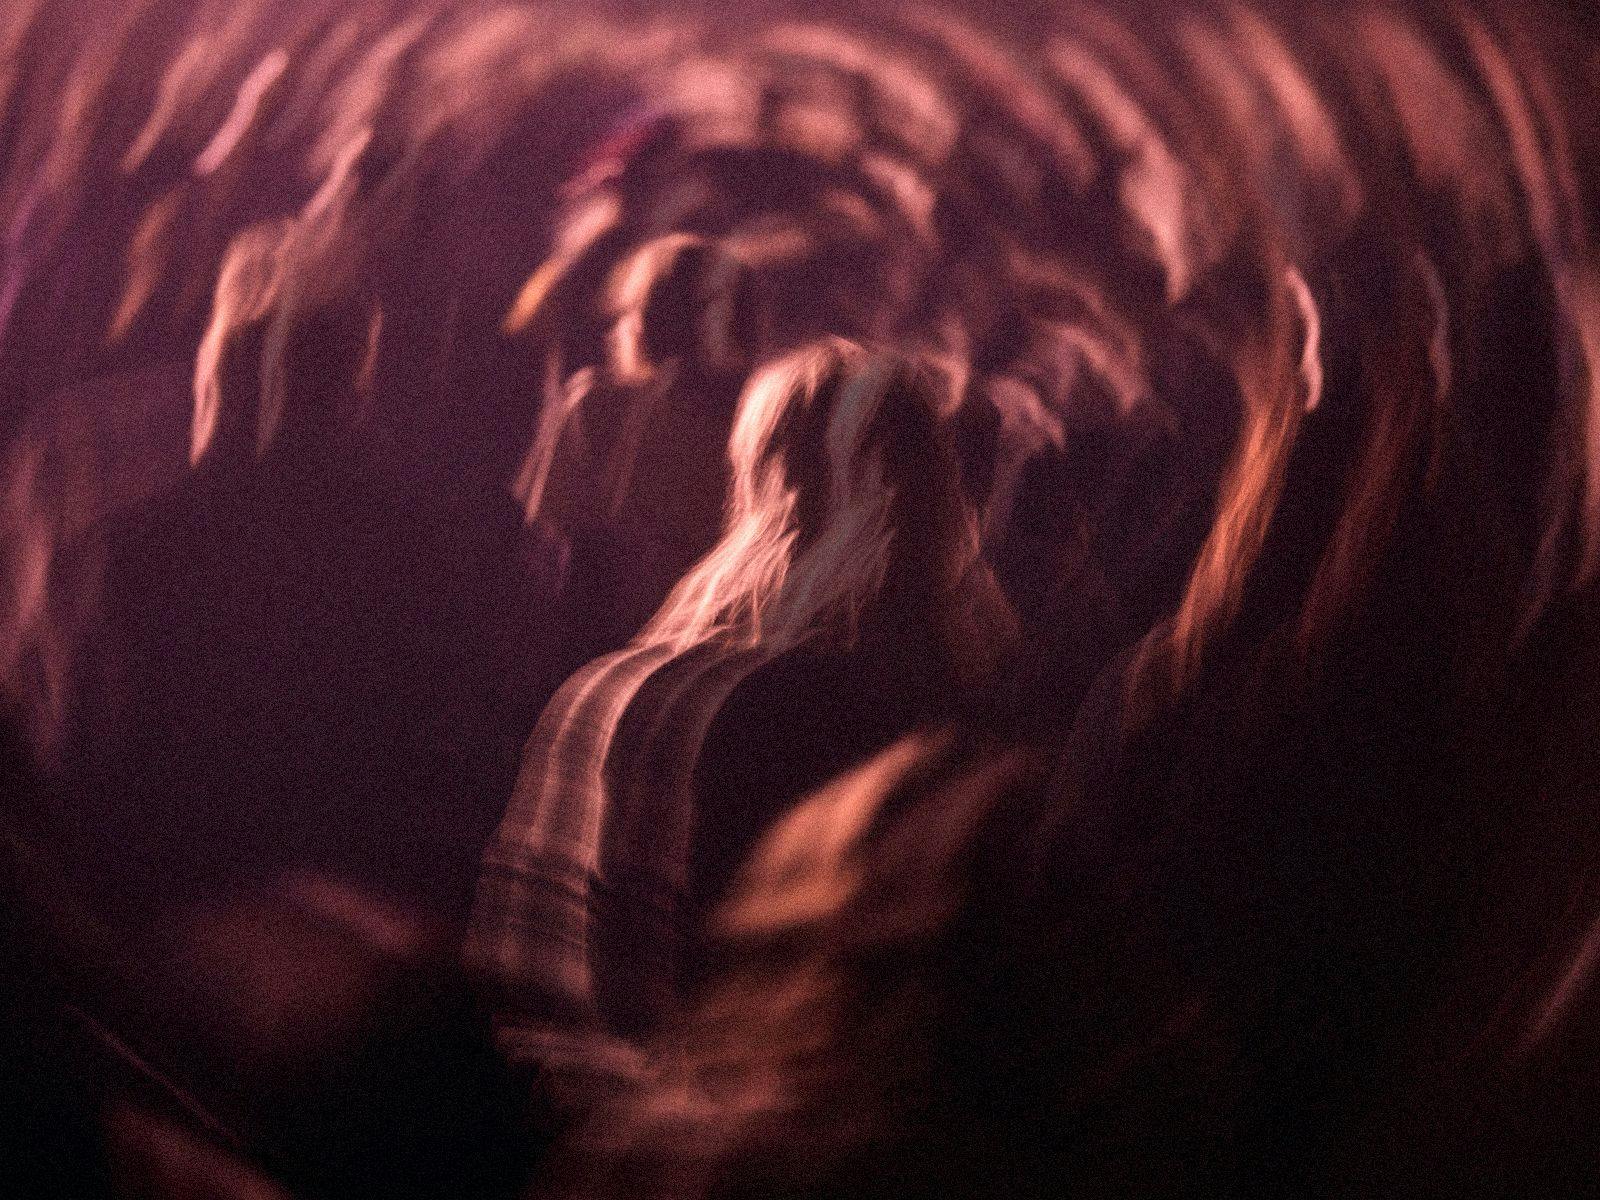 A blurred and warped image of several people standing in a crowd.